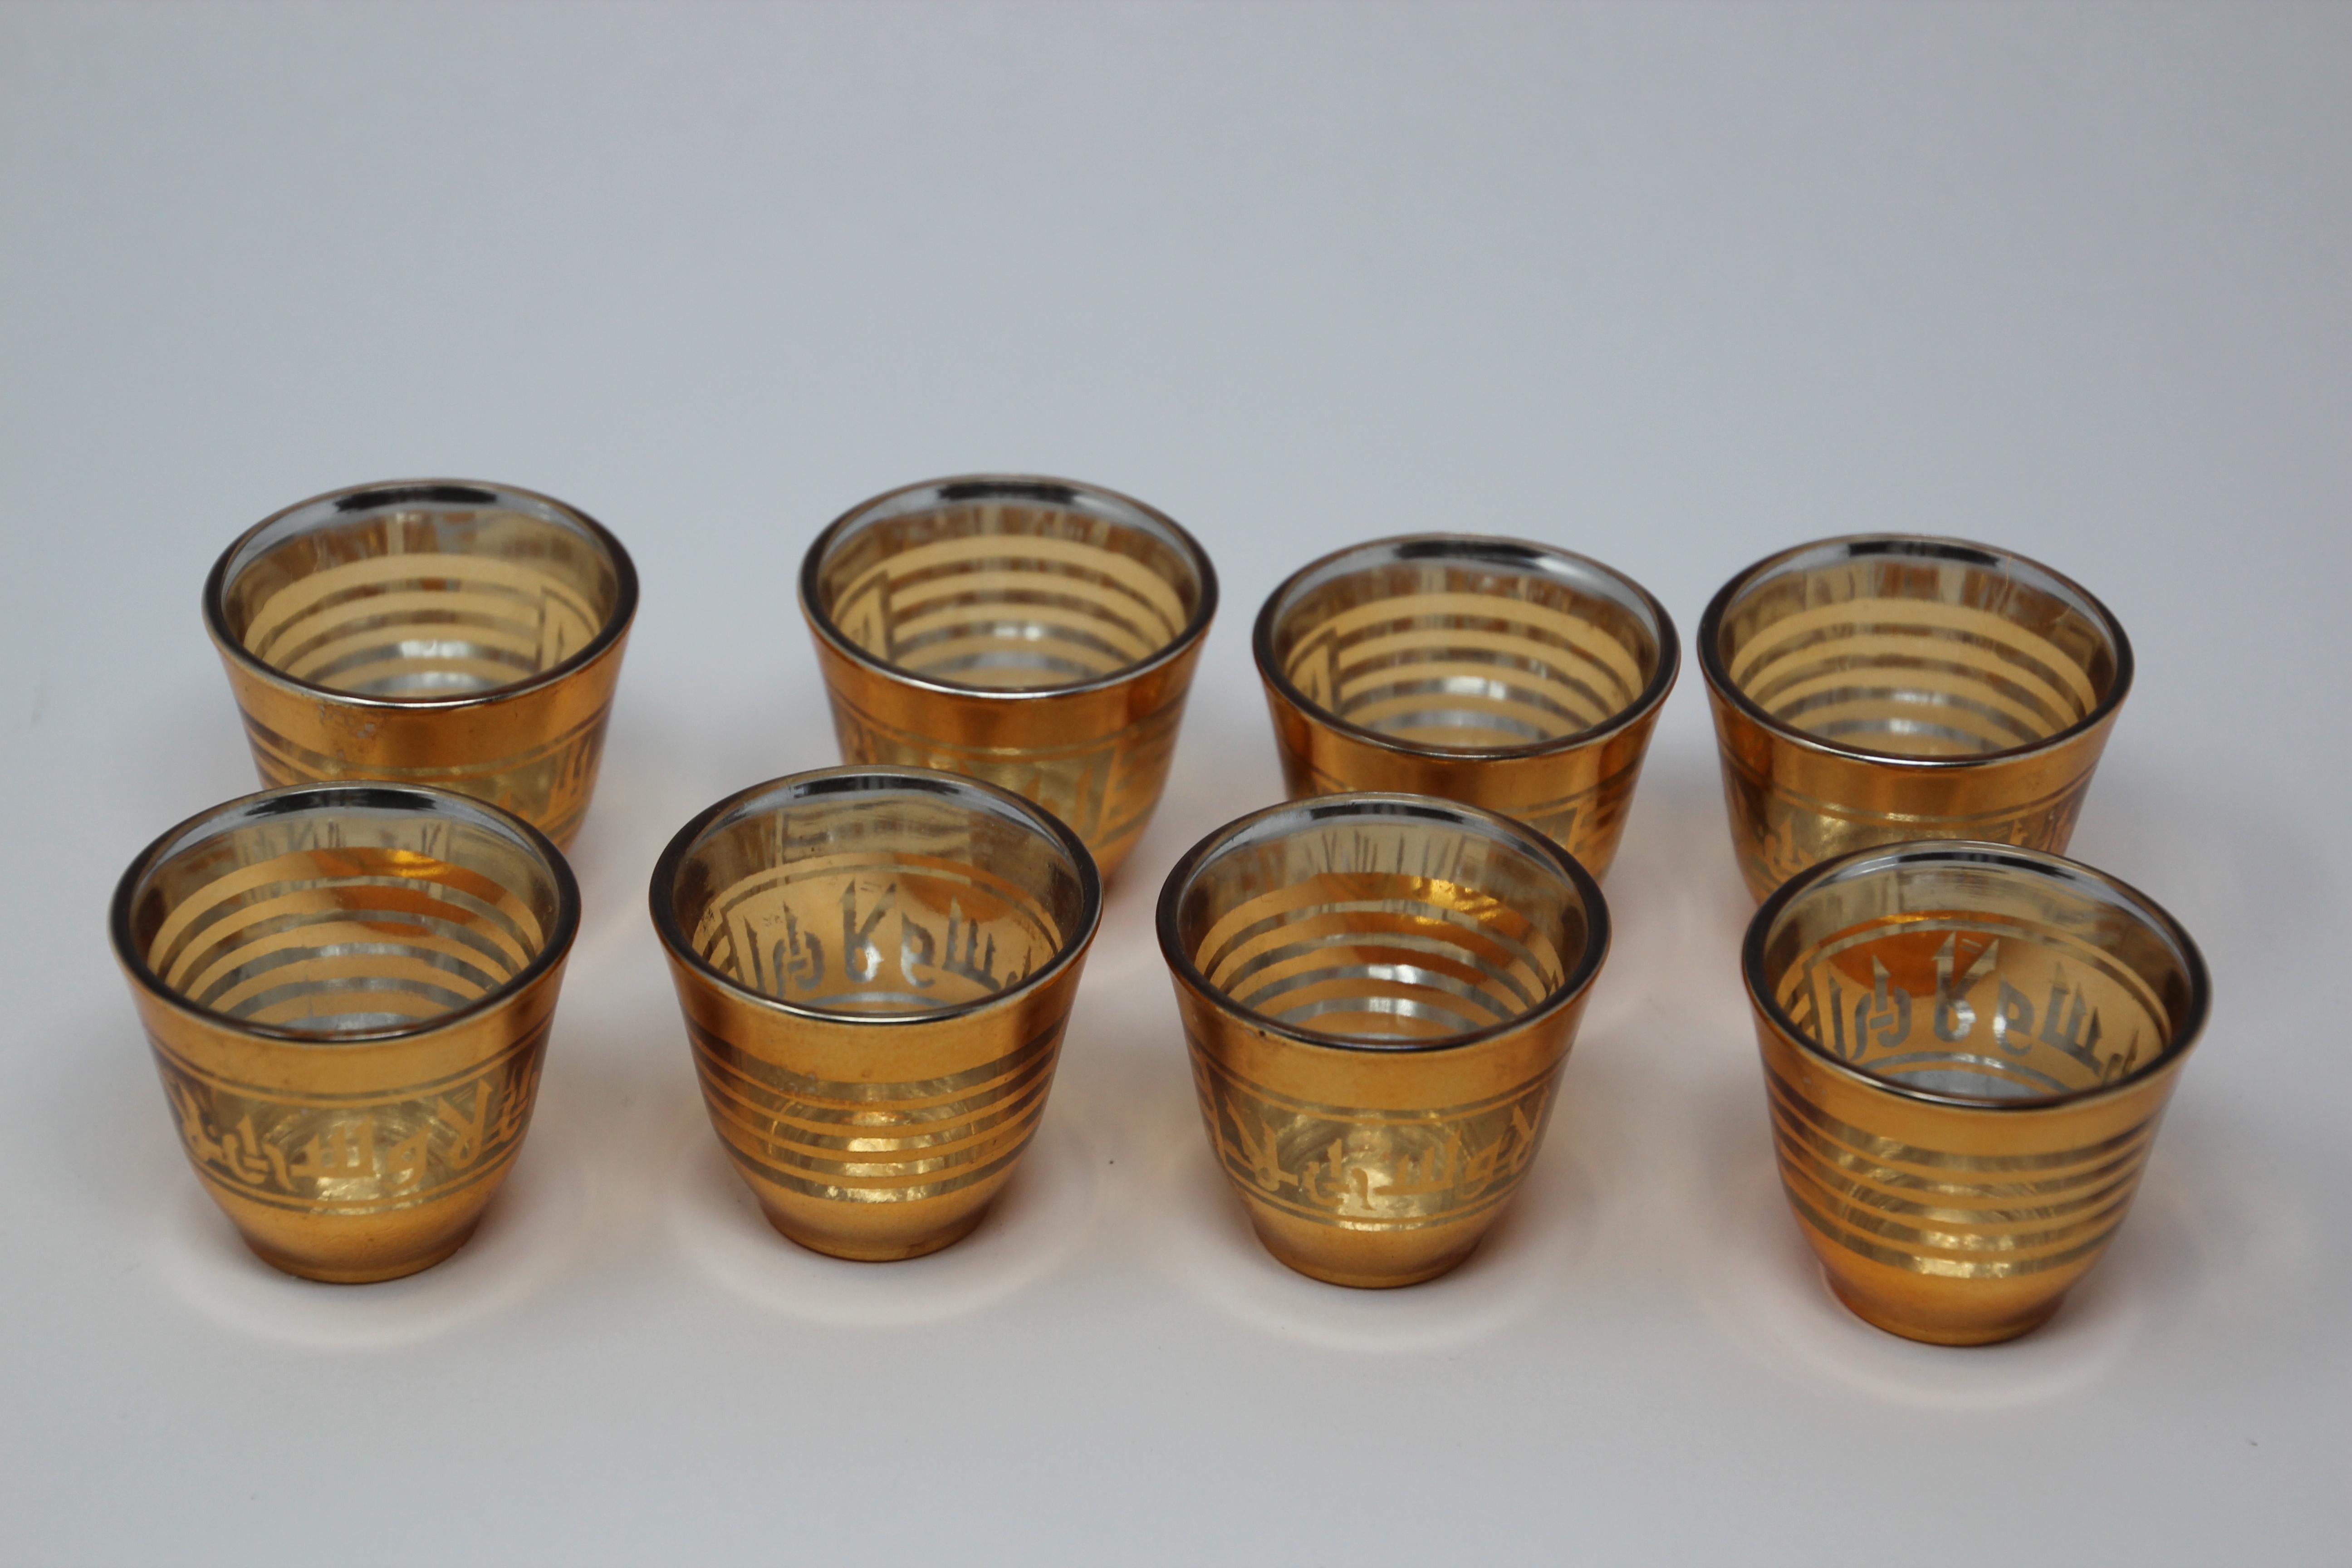 Set of six Arabic shot glasses with gold raised overlay design.
Use these elegant glasses for Moroccan, Middle Eastern, Persian tea, or any hot or cold shot liquor drink.
In fantastic condition, perfect for the holidays and gorgeous on display in a